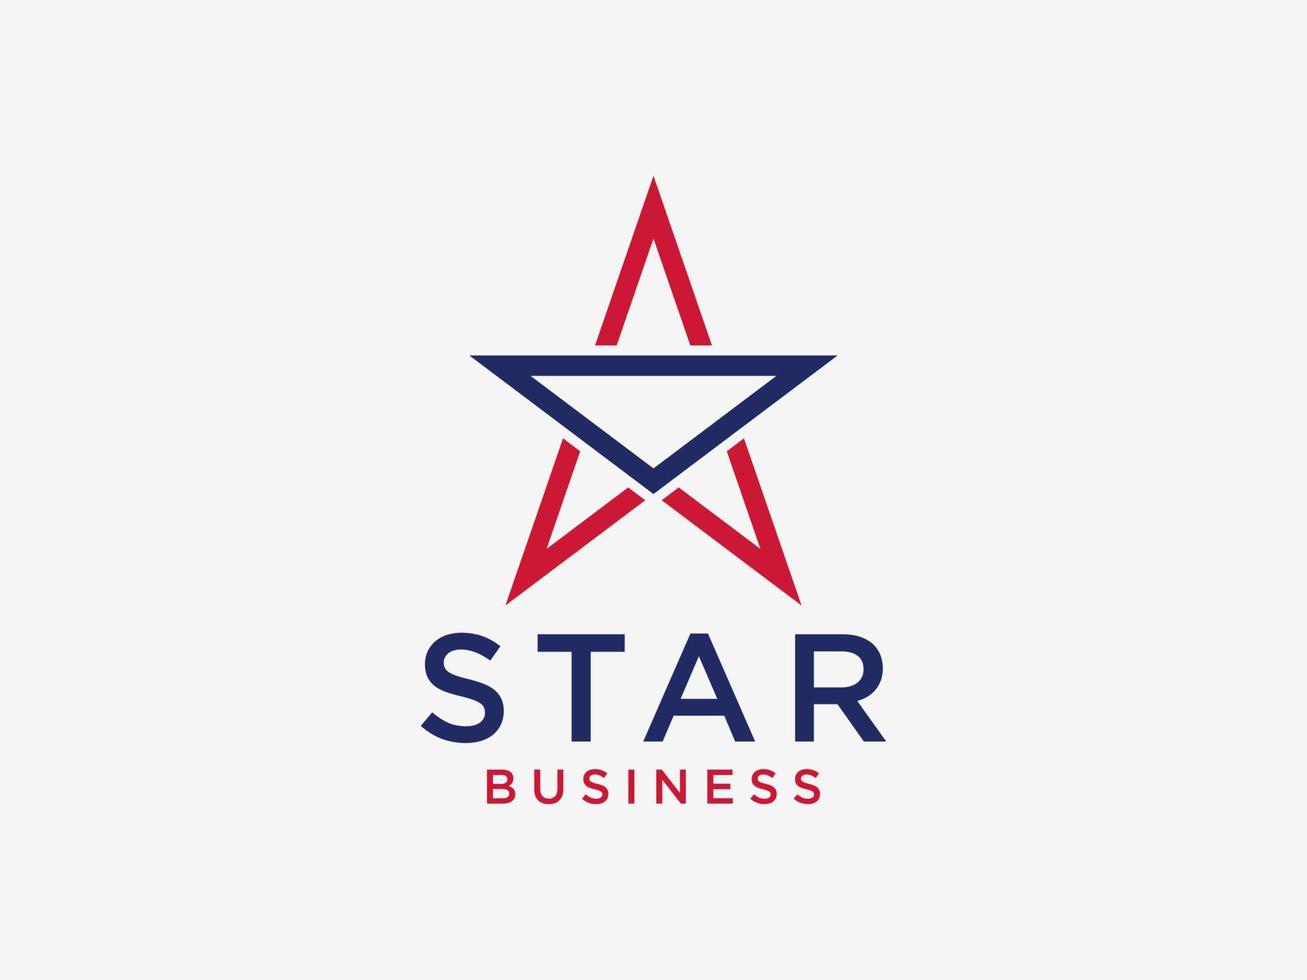 Star Logo. Blue and Red Geometric Star Shape isolated on White Background. Usable for Business and Branding Logos. Flat Vector Logo Design Template Element